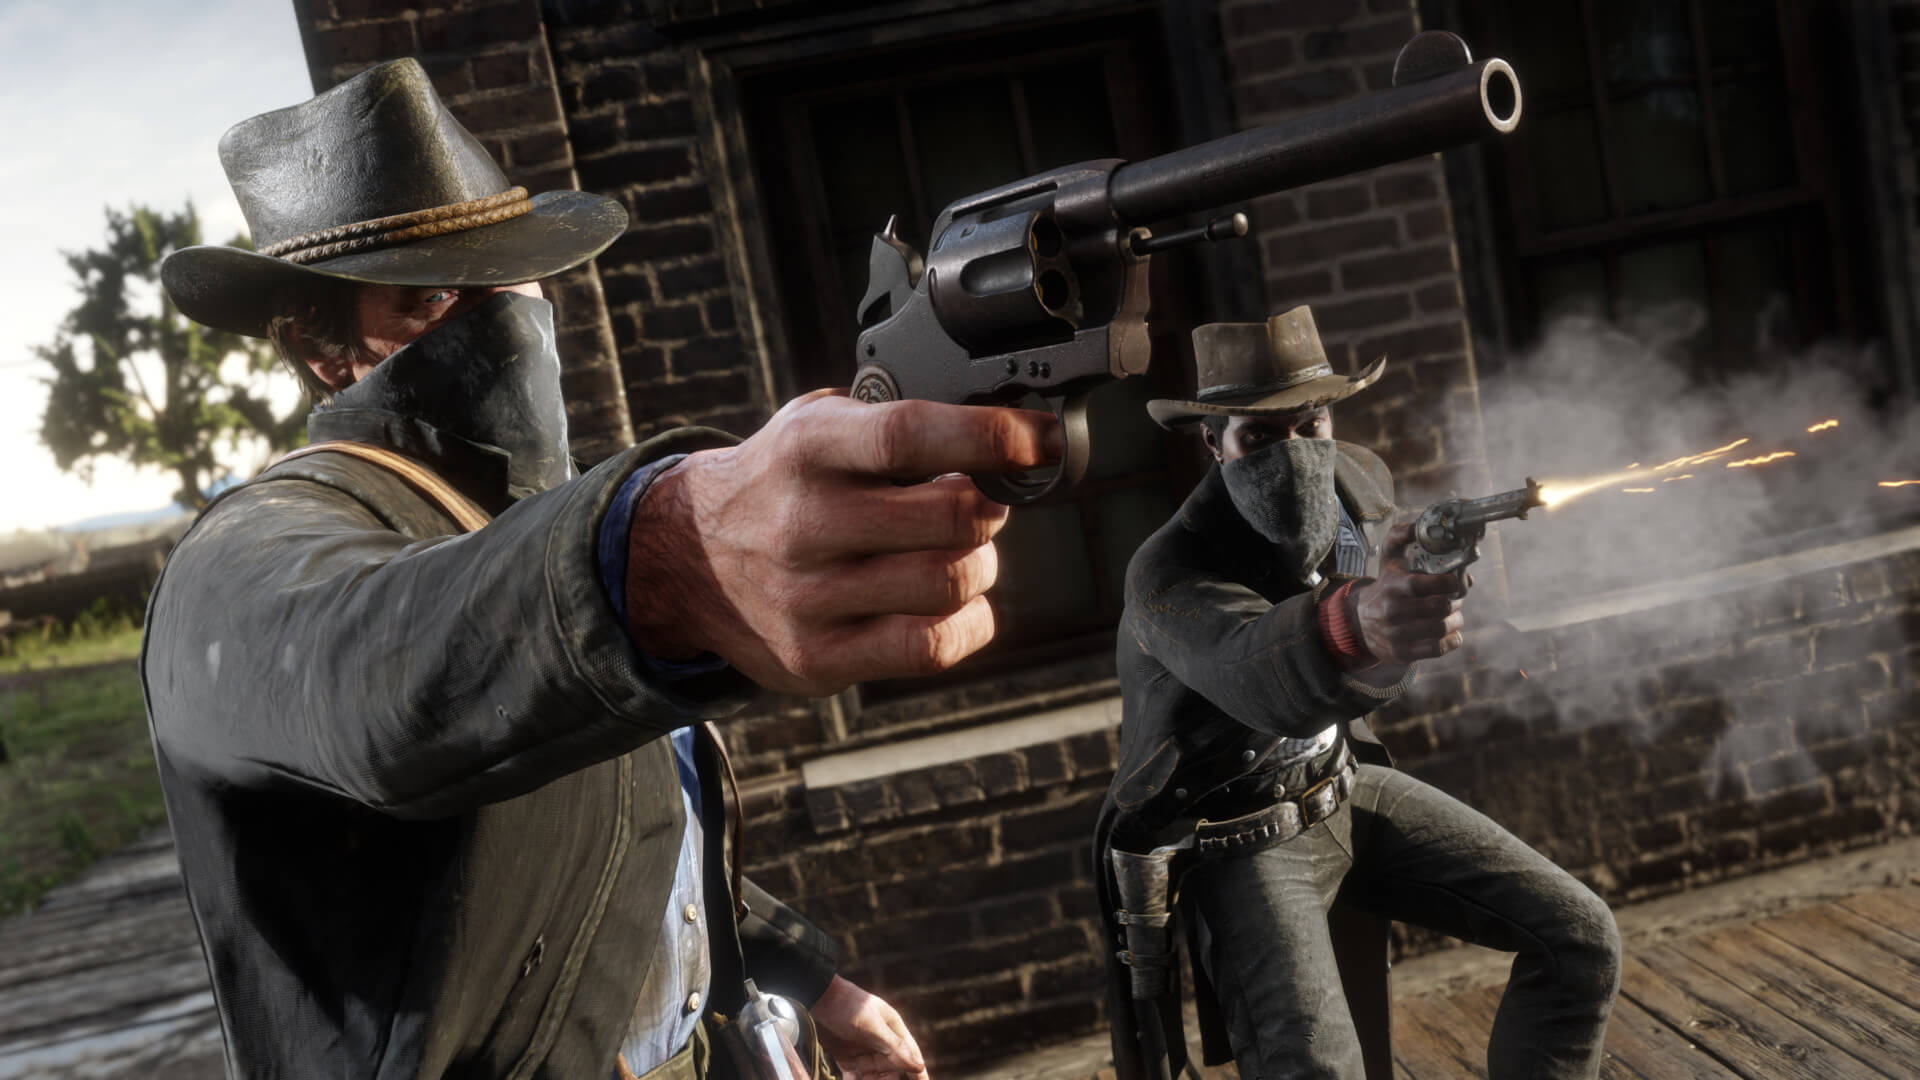 Two outlaws aiming guns, one of which is being fired, in Red Dead Redemption 2